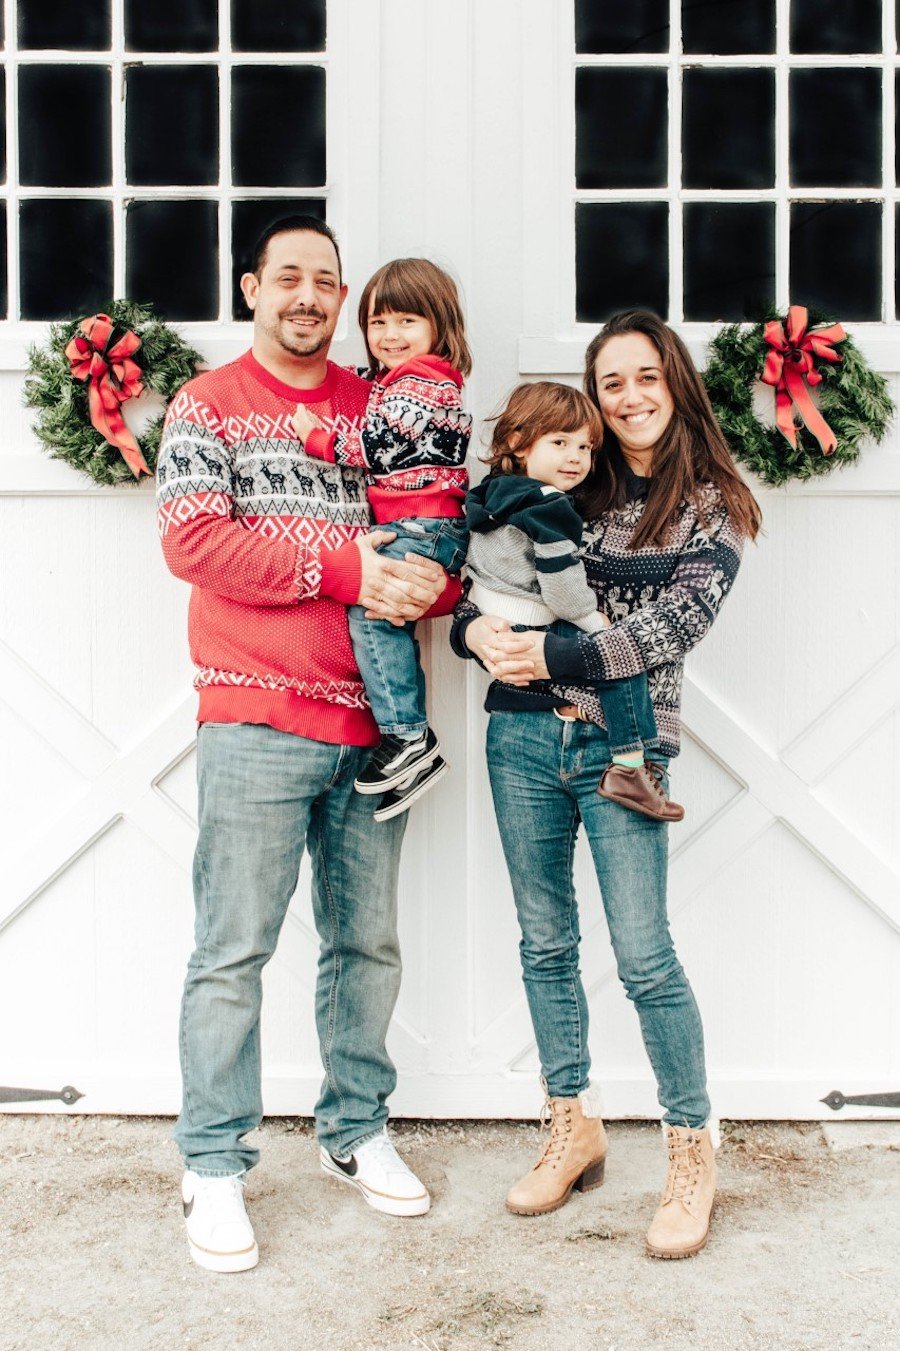 christmas lights app developer mike kane and family in their 2021 holiday photo